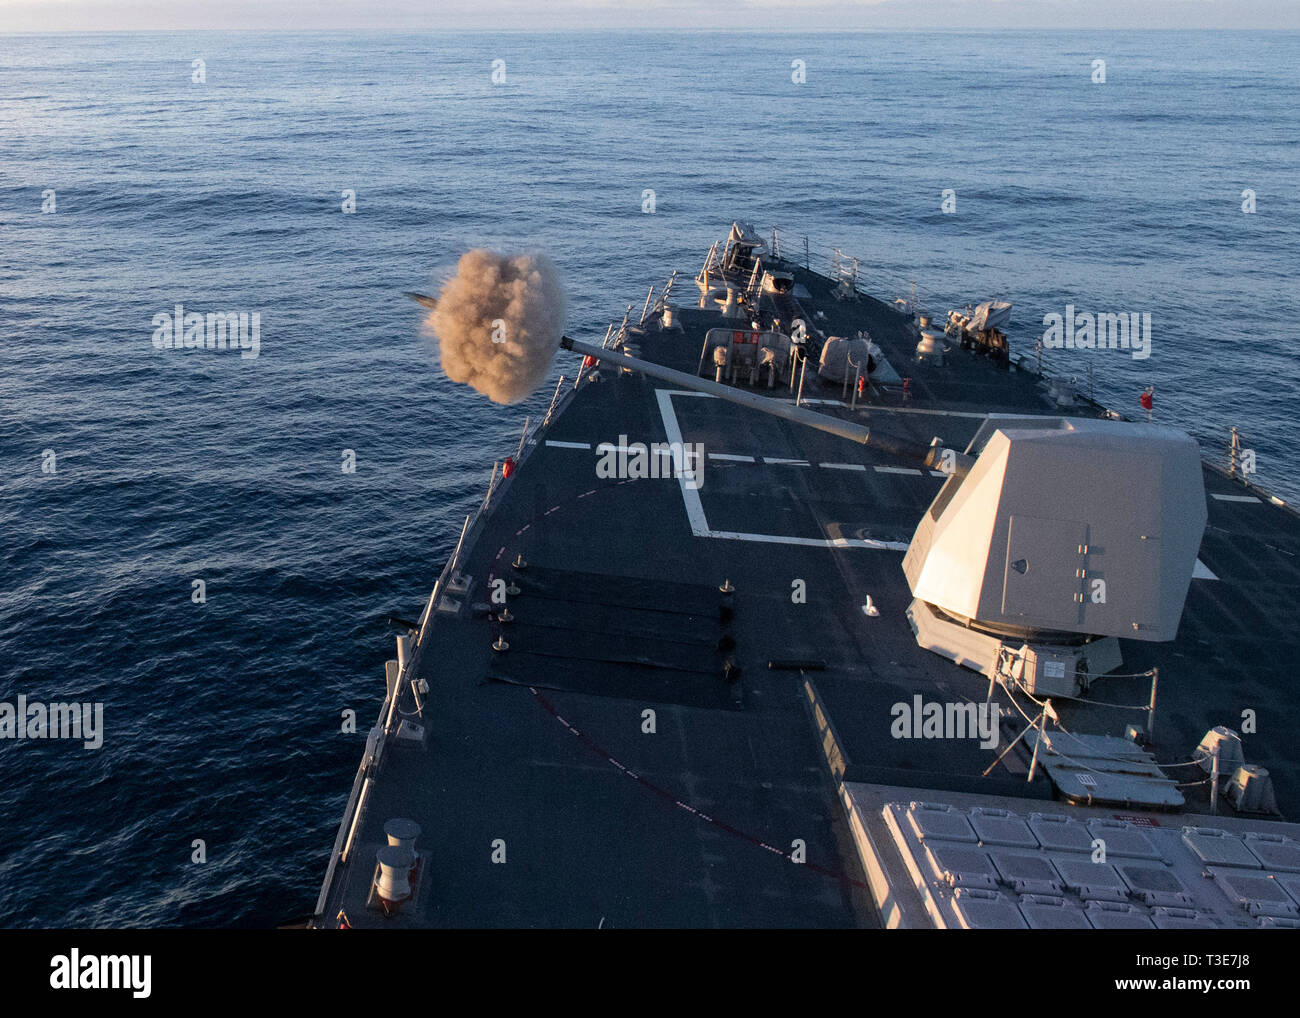 190330-N-RH019-0002 PACIFIC OCEAN (Mar. 30, 2019) The guided-missile destroyer USS Momsen (DDG 92) fires the MK-45 5-inch gun as part of a live fire exercise. Momsen is conducting routine operations in the eastern Pacific. (U.S. Navy photo by Mass Communication Specialist 2nd Class Sean Rinner/Released) Stock Photo